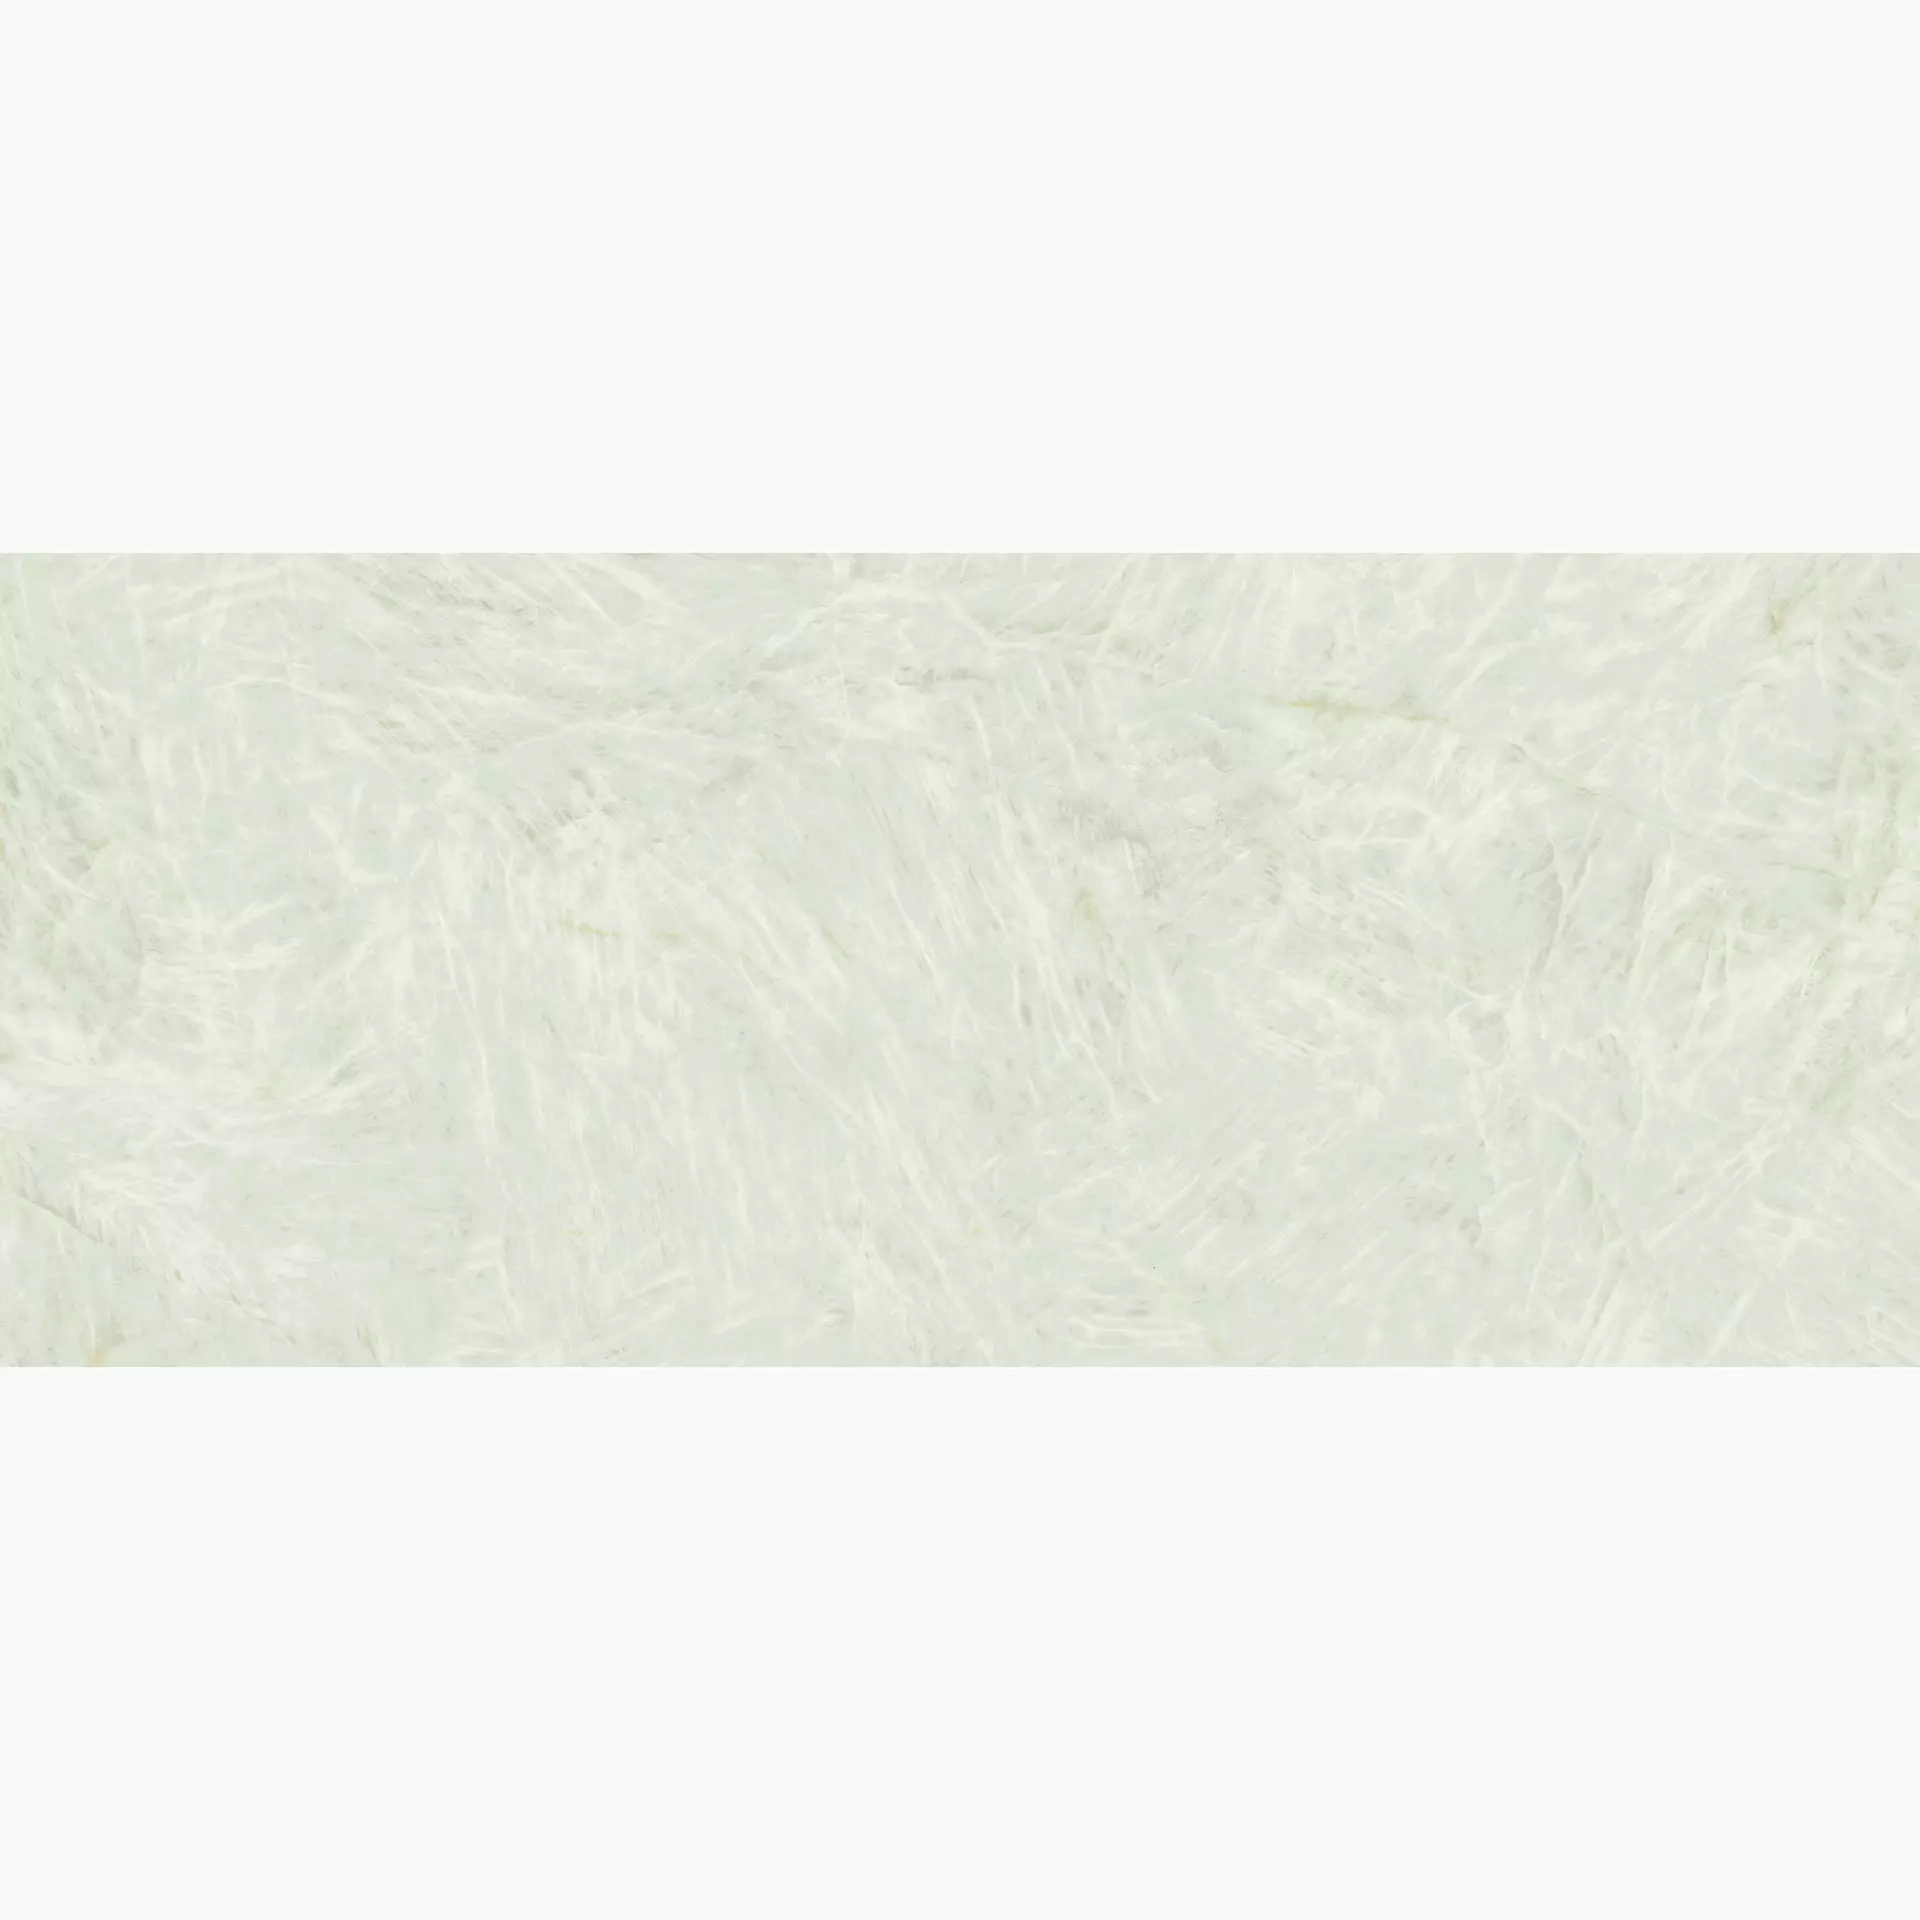 Atlasconcorde Marvel Gala Crystal White Lappato AFXW 120x278cm rectified 6mm